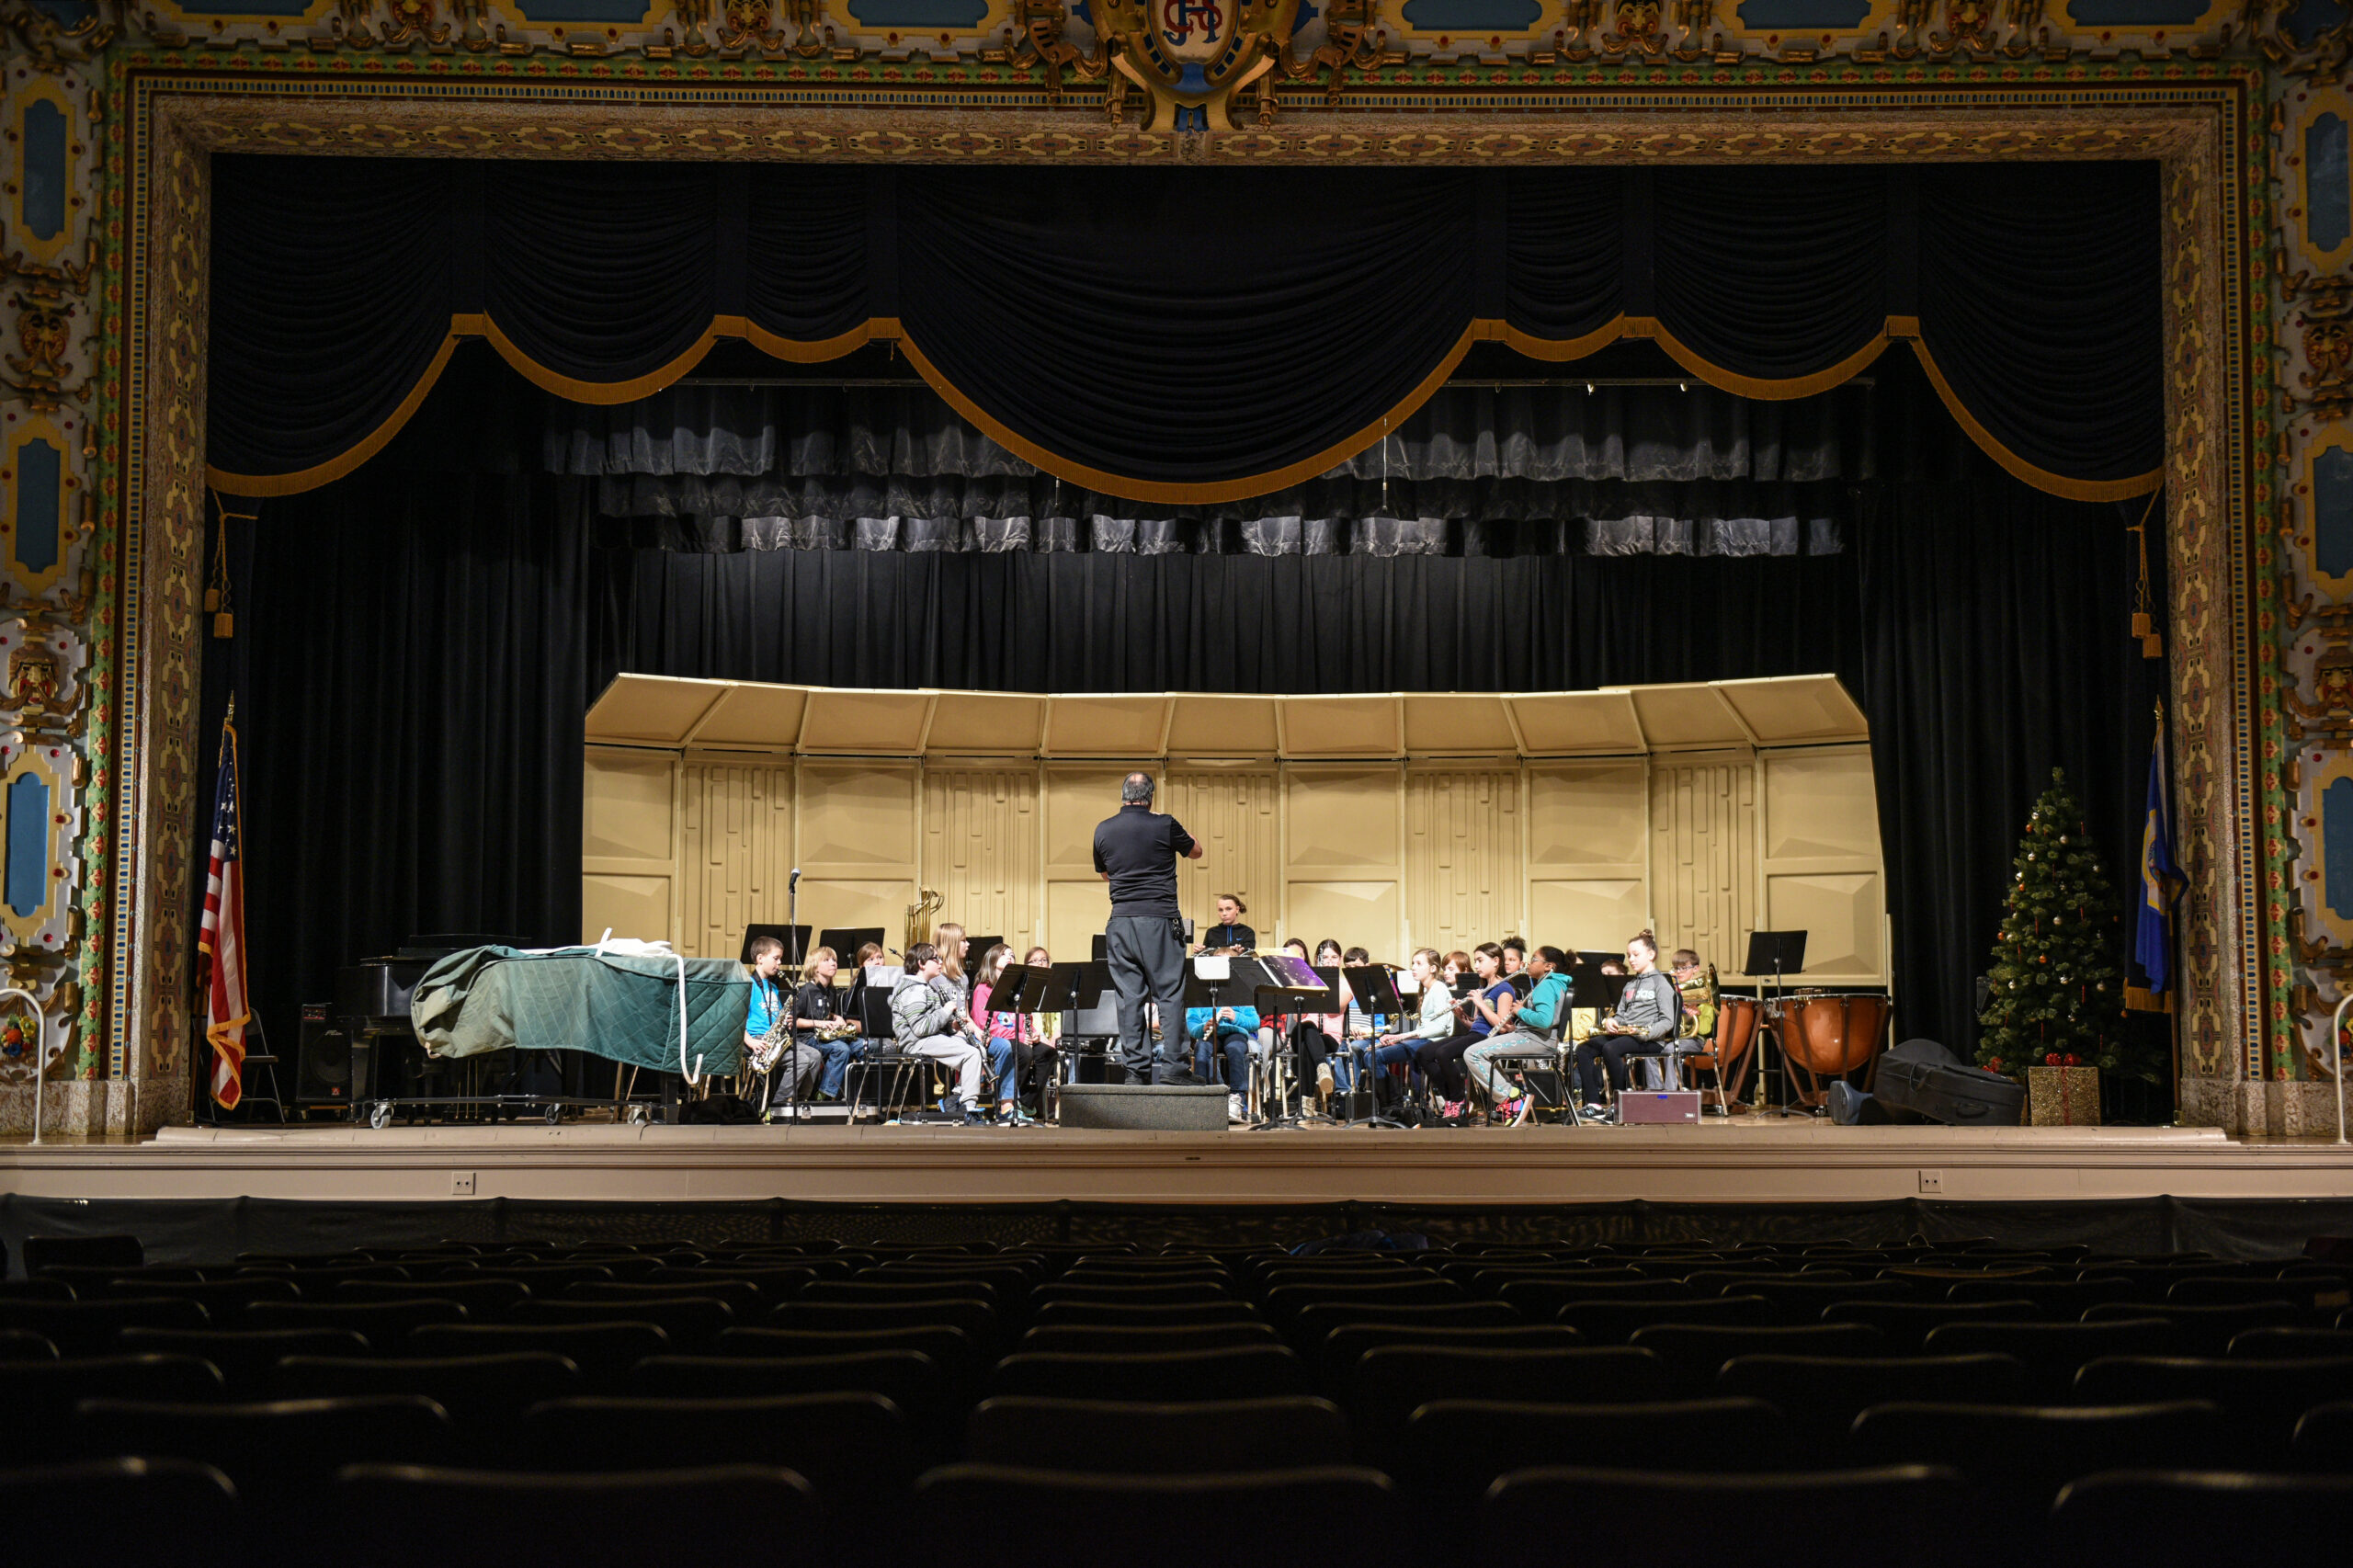 A youth orchestra on a historic stage with an adult conductor